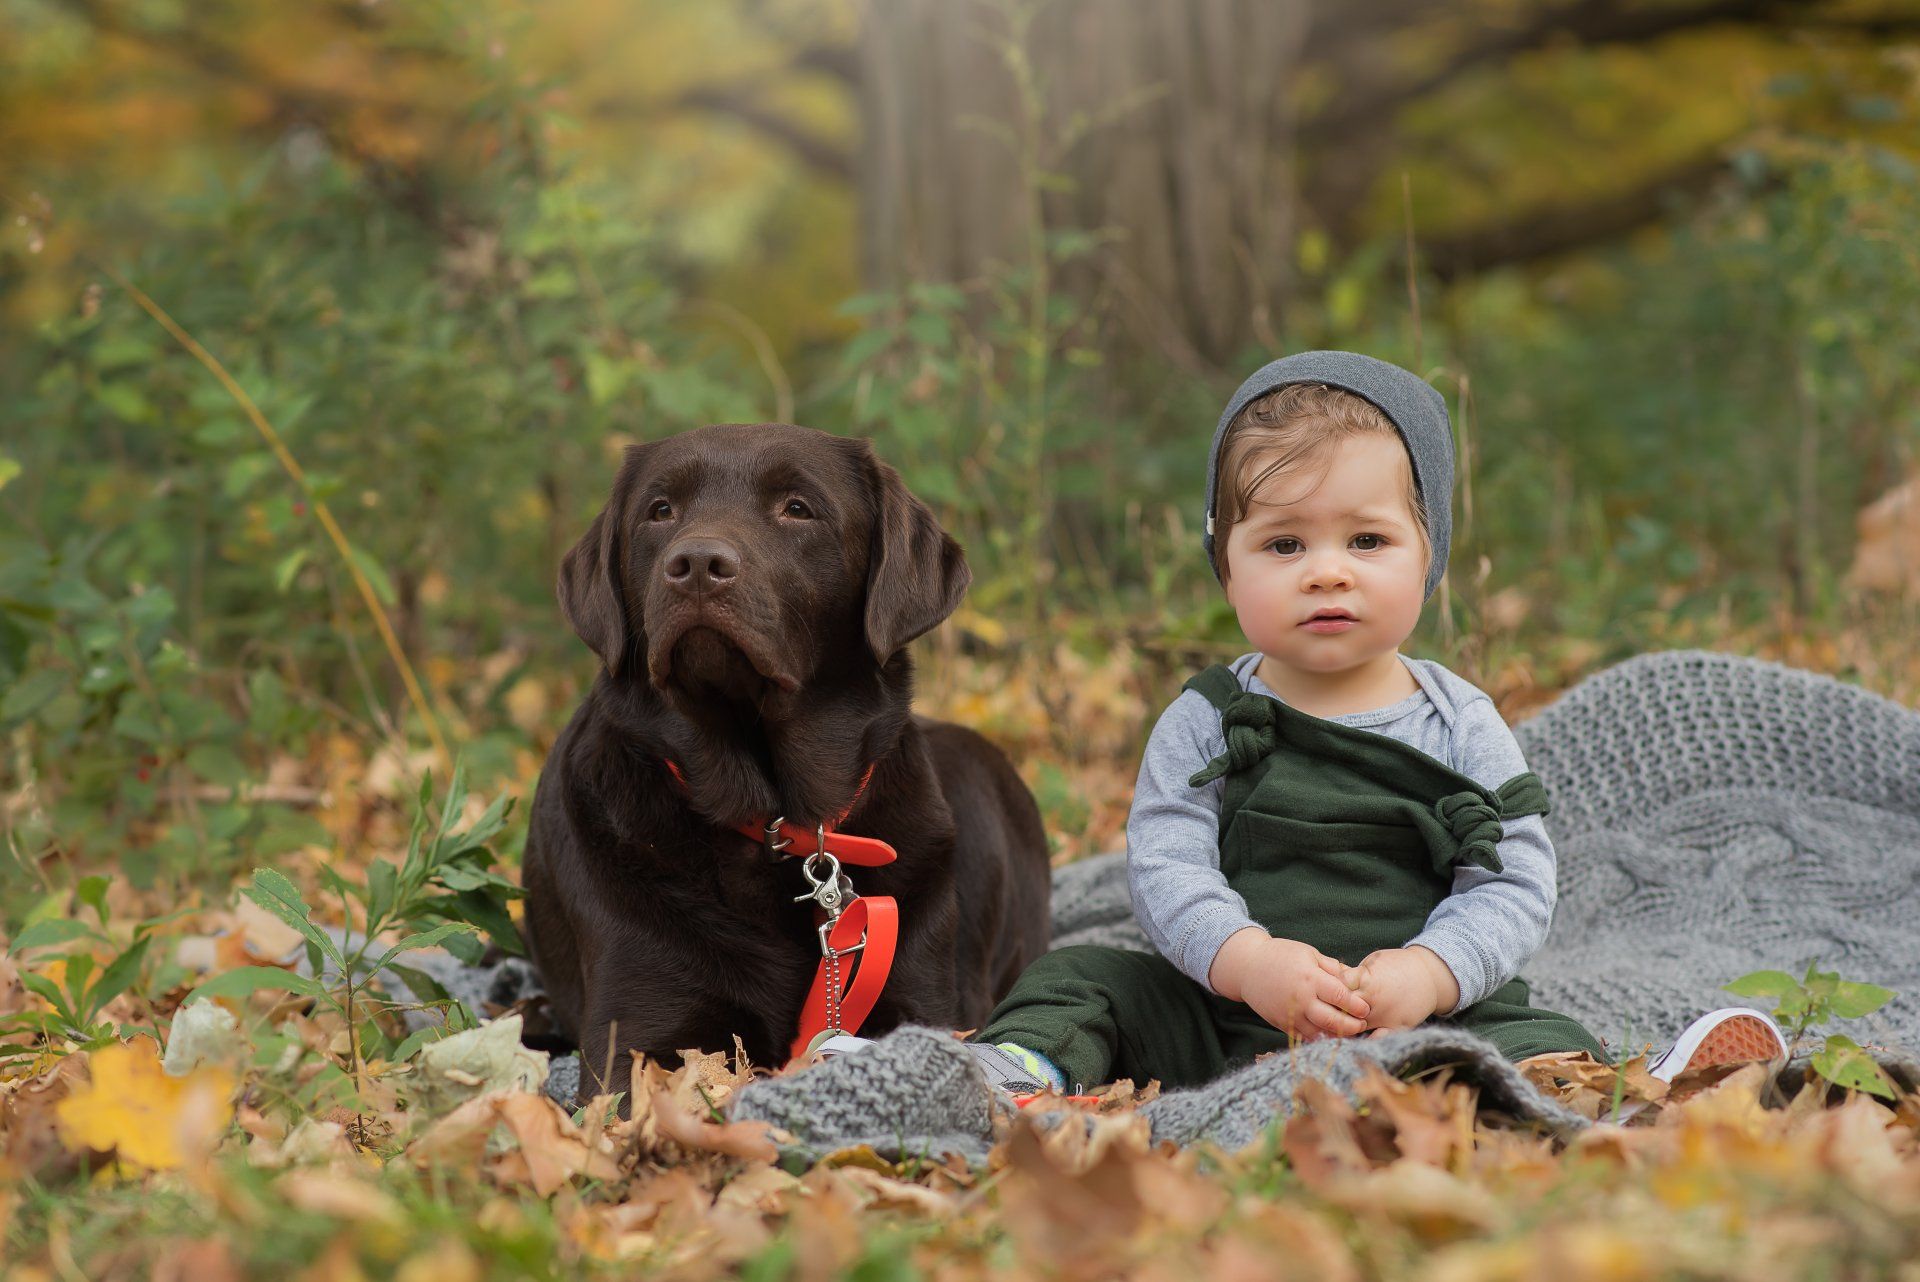 Photograph of sitting toddler with dog